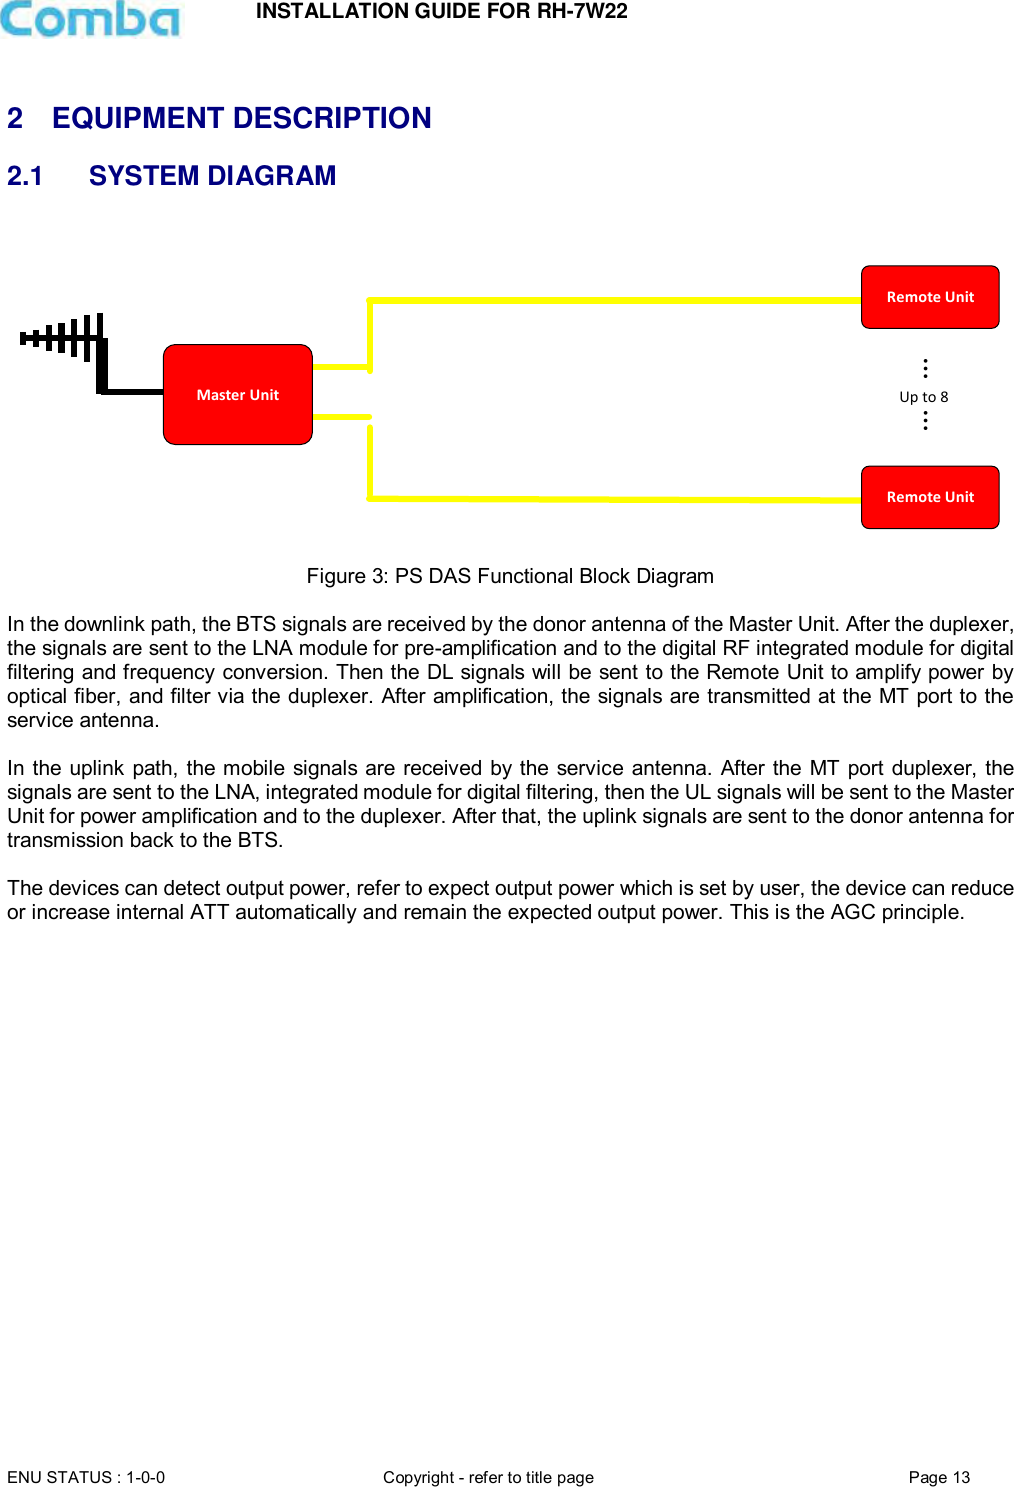 INSTALLATION GUIDE FOR RH-7W22  ENU STATUS : 1-0-0 Copyright - refer to title page Page 13      2  EQUIPMENT DESCRIPTION 2.1  SYSTEM DIAGRAM              Figure 3: PS DAS Functional Block Diagram  In the downlink path, the BTS signals are received by the donor antenna of the Master Unit. After the duplexer, the signals are sent to the LNA module for pre-amplification and to the digital RF integrated module for digital filtering and frequency conversion. Then the DL signals will be sent to the Remote Unit to amplify power by optical fiber, and filter via the duplexer. After amplification, the signals are transmitted at the MT port to the service antenna.   In the uplink path, the mobile signals are received by the service antenna. After the MT port duplexer, the signals are sent to the LNA, integrated module for digital filtering, then the UL signals will be sent to the Master Unit for power amplification and to the duplexer. After that, the uplink signals are sent to the donor antenna for transmission back to the BTS.  The devices can detect output power, refer to expect output power which is set by user, the device can reduce or increase internal ATT automatically and remain the expected output power. This is the AGC principle.      …     … Remote Unit Remote Unit Master Unit Up to 8 